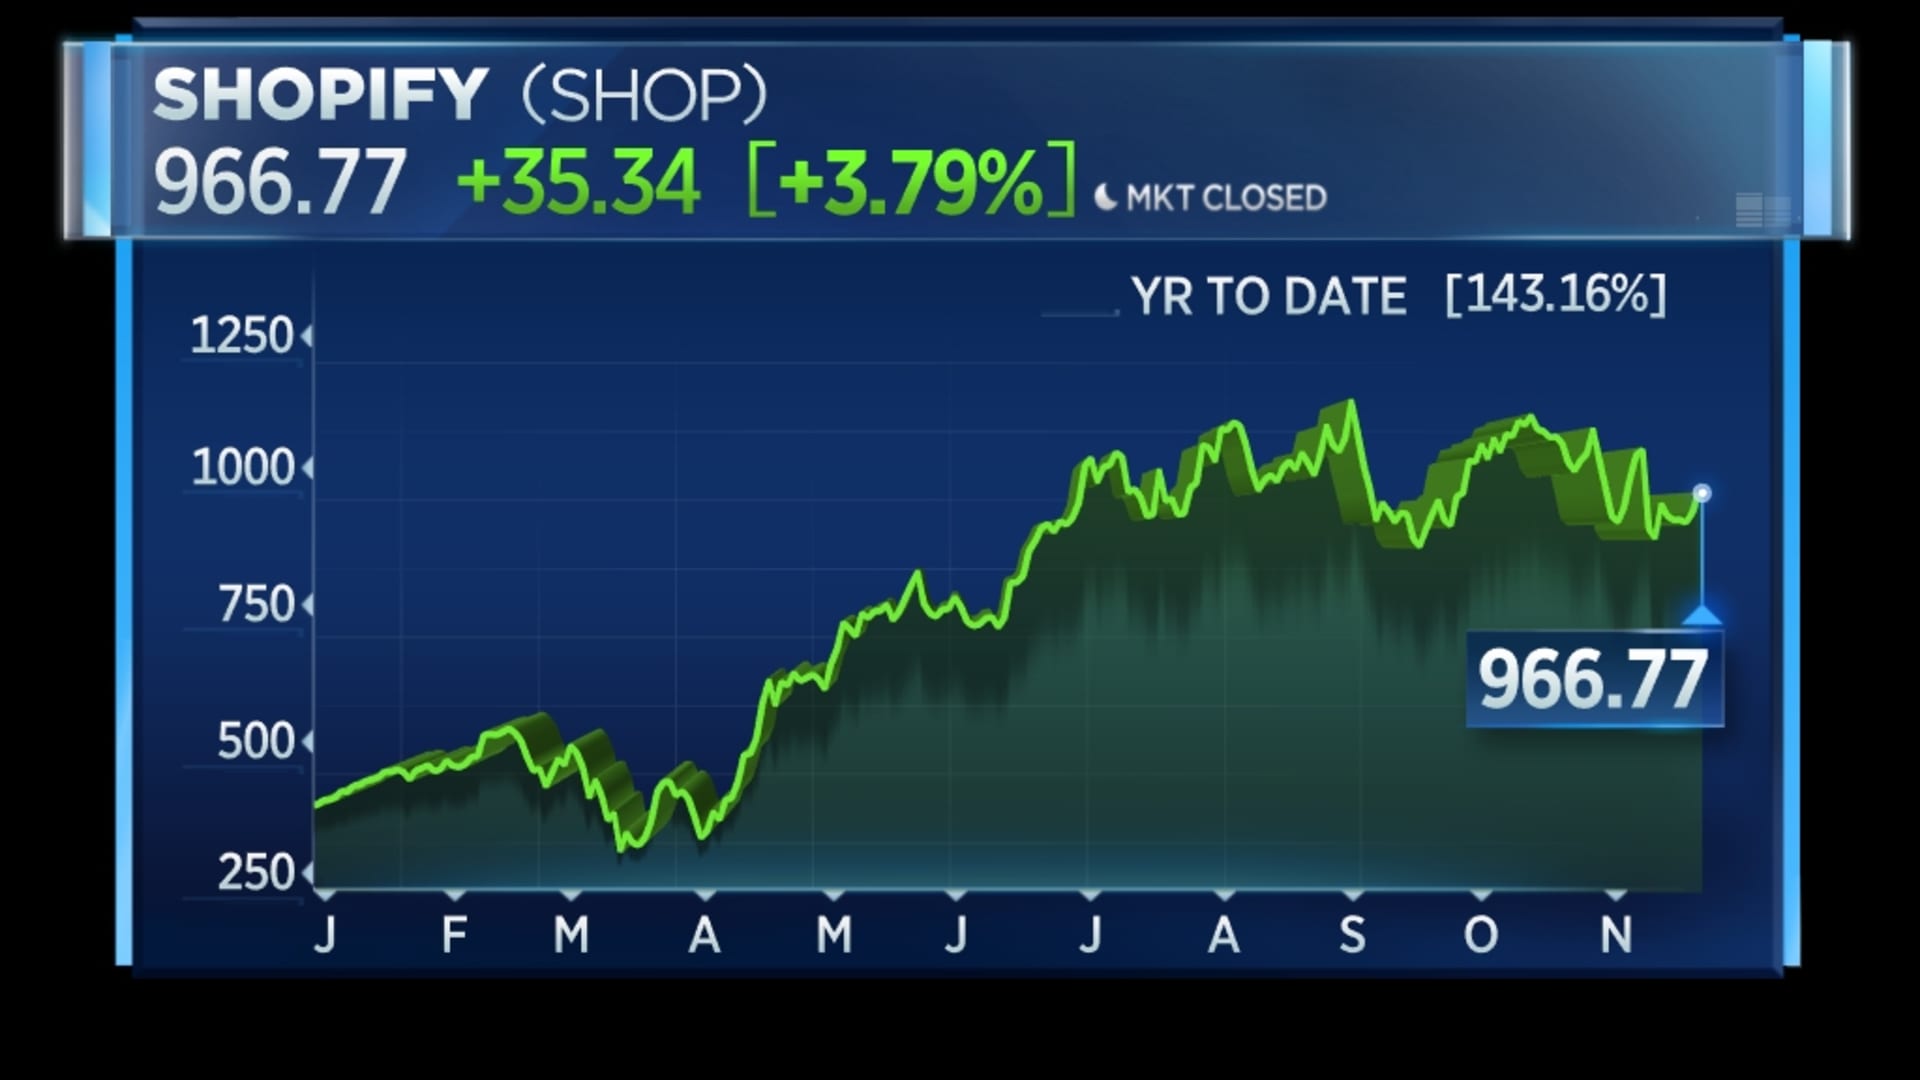 Shopify's 2020 rally